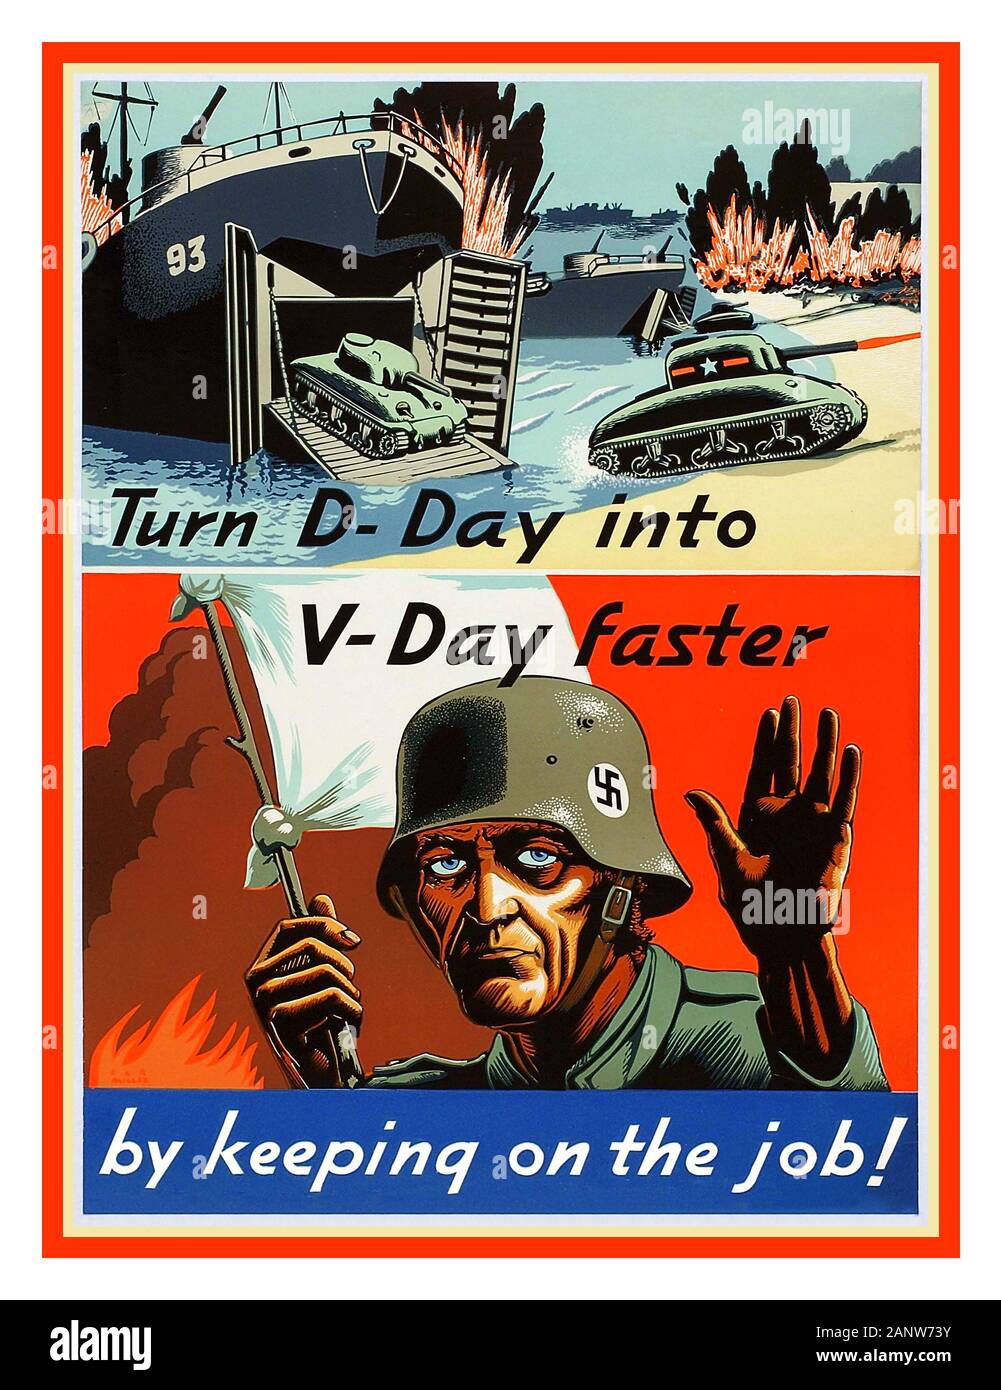 Vintage 1940's WW2 American Propaganda war industrial job work output Poster 'Turn D-Day into V-Day faster, by keeping on the job' Illustrating American landing craft on Normandy Beaches and below, a sombre surrendering German Army Soldier wearing Swastika emblem helmet waving white Flag with hand up in surrender Stock Photo